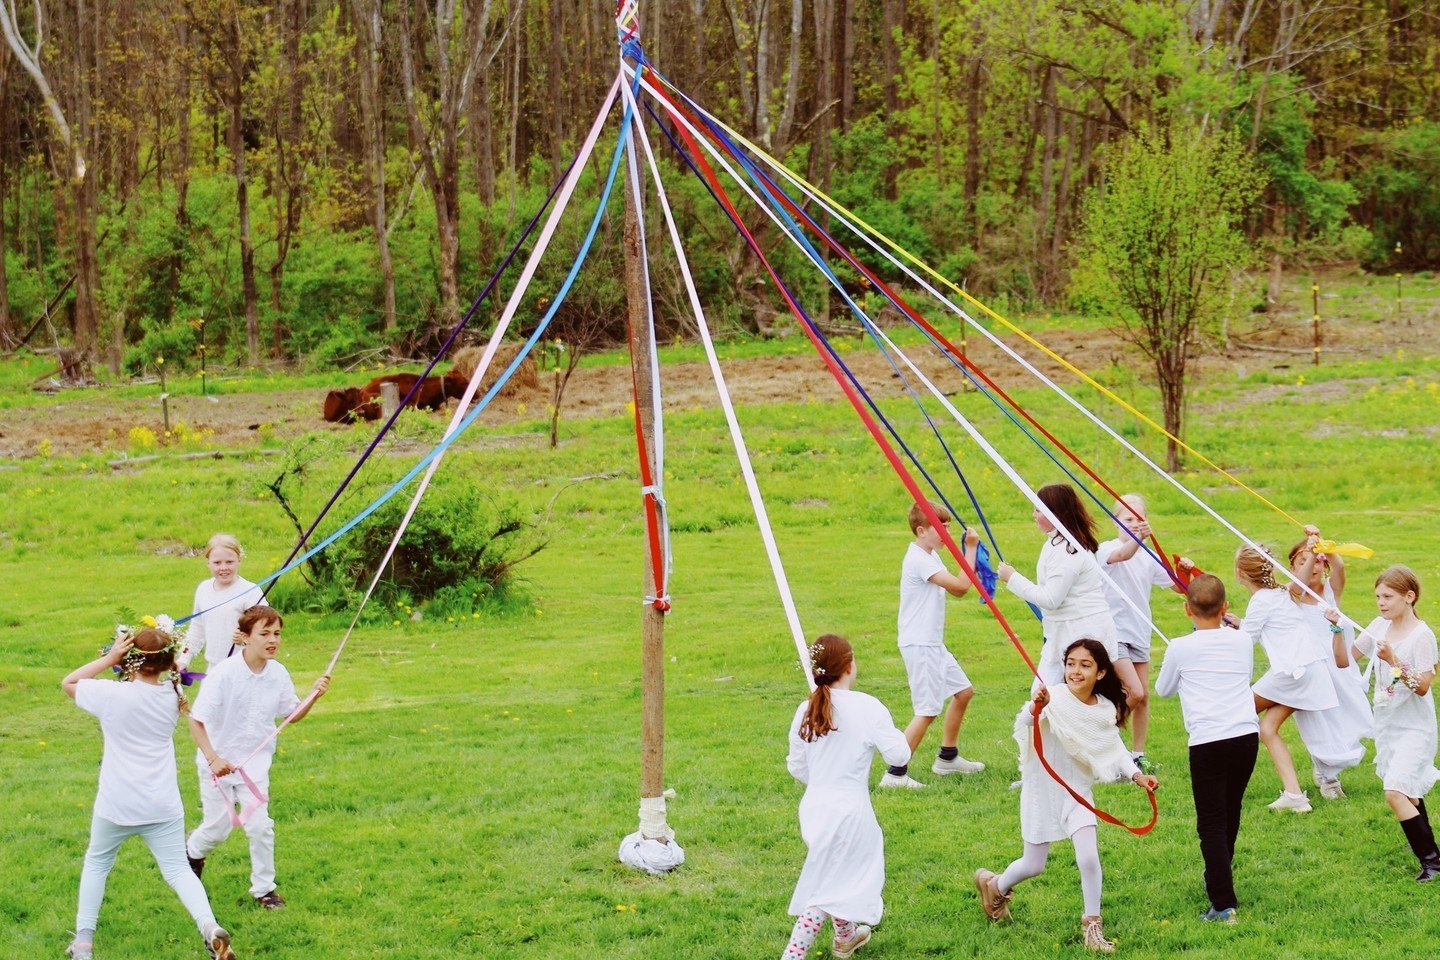 A few more MayFaire highlights. Observing seasonal festivals is an important part of the interdisciplinary curriculum at Waldorf Schools. Besides the music, dance, history, art, math and science that's involved behind the scenes, these traditions are